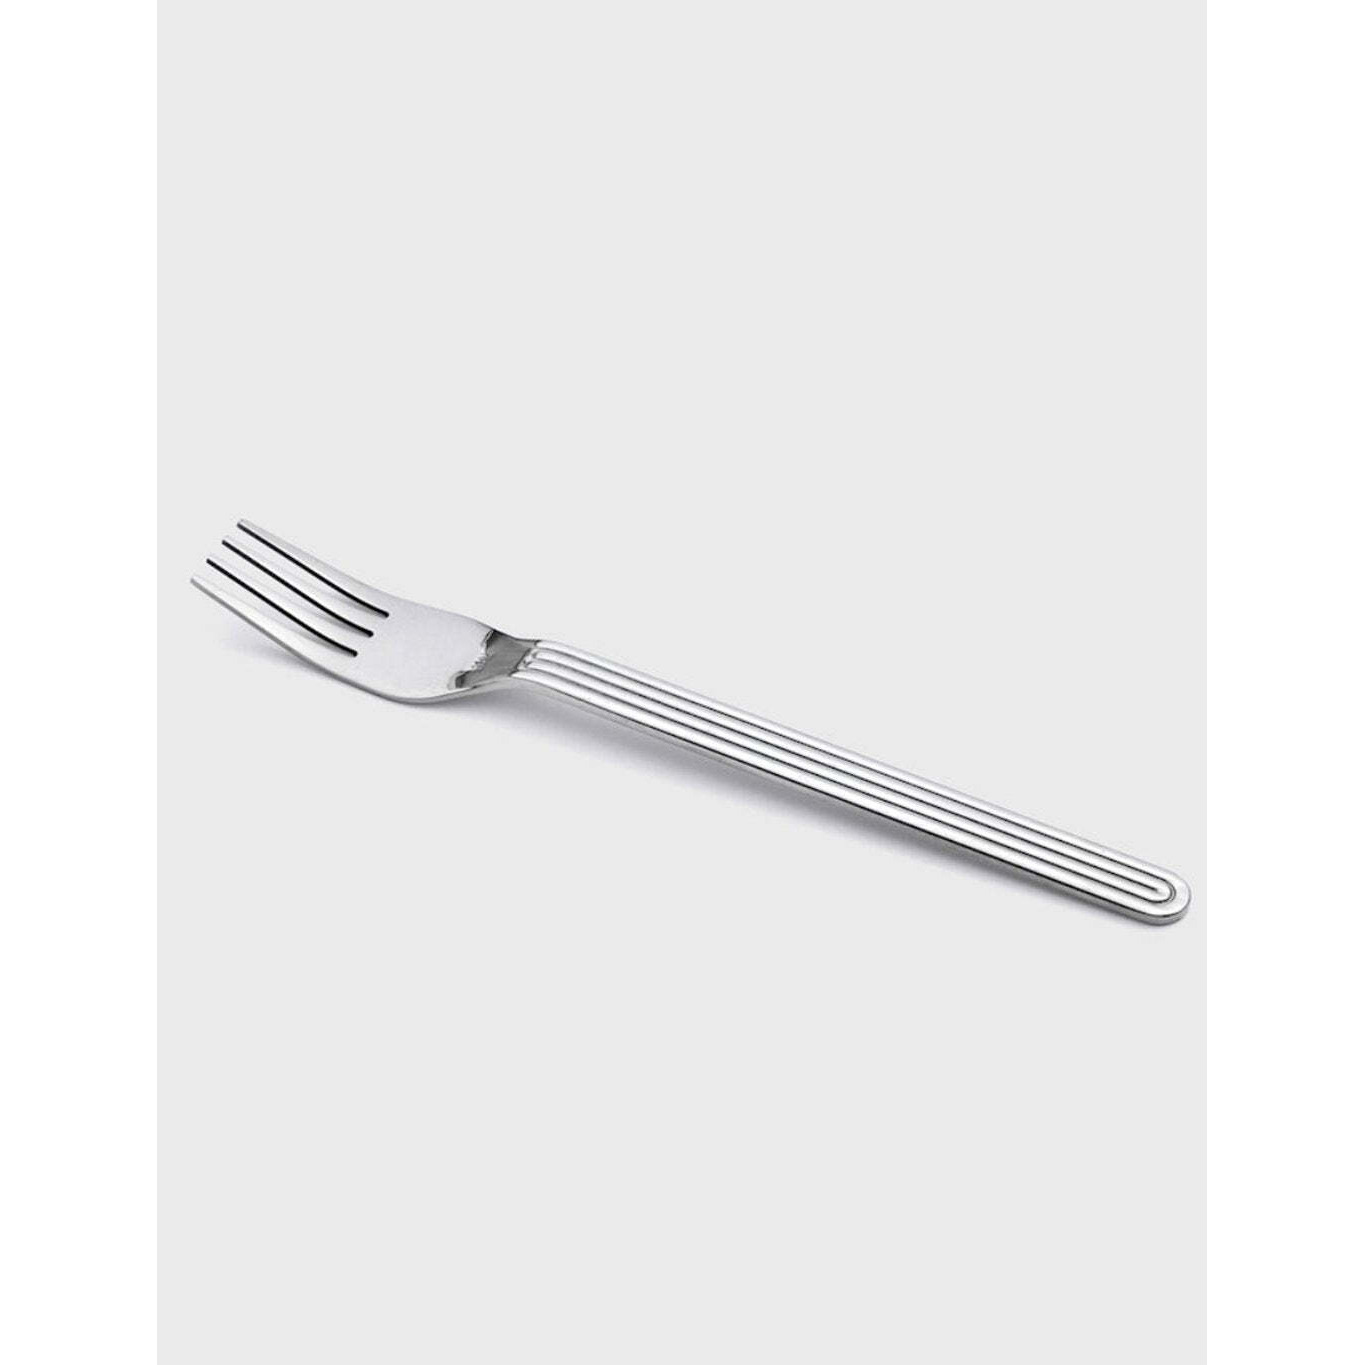 Hay Sunday Fork (5 Piece Set) - Stainless Steel